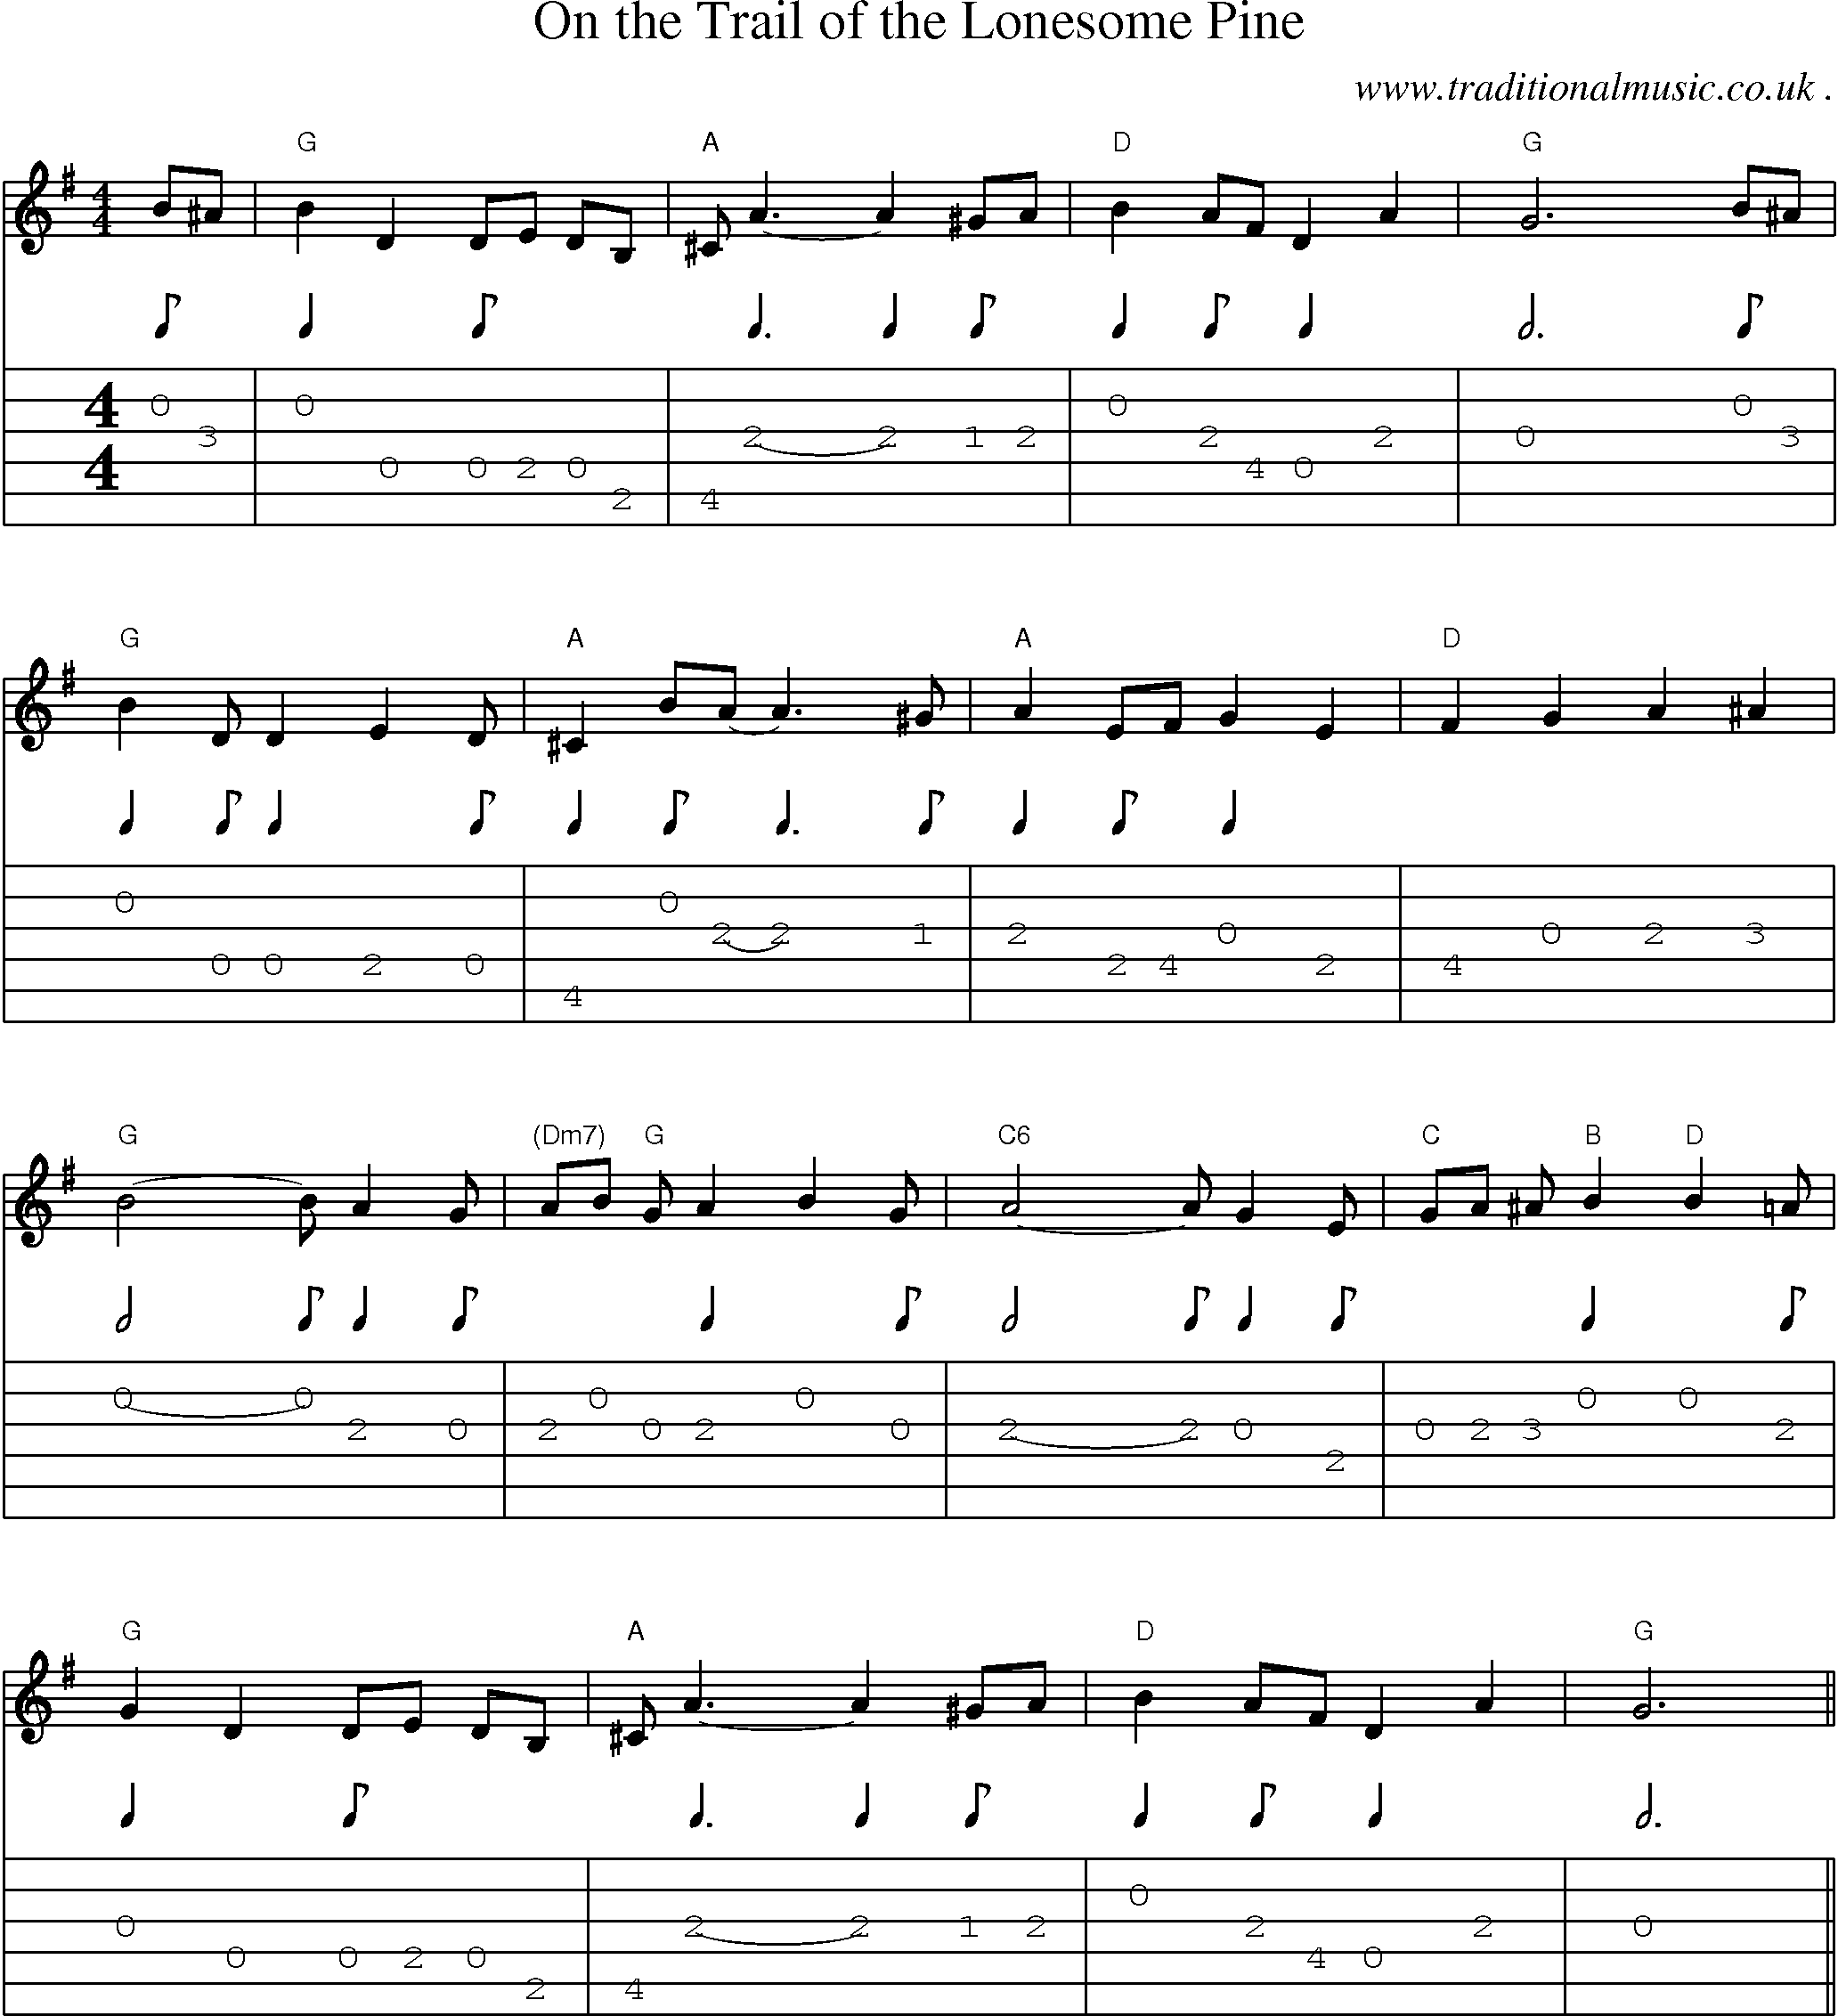 Music Score and Guitar Tabs for On The Trail Of The Lonesome Pine